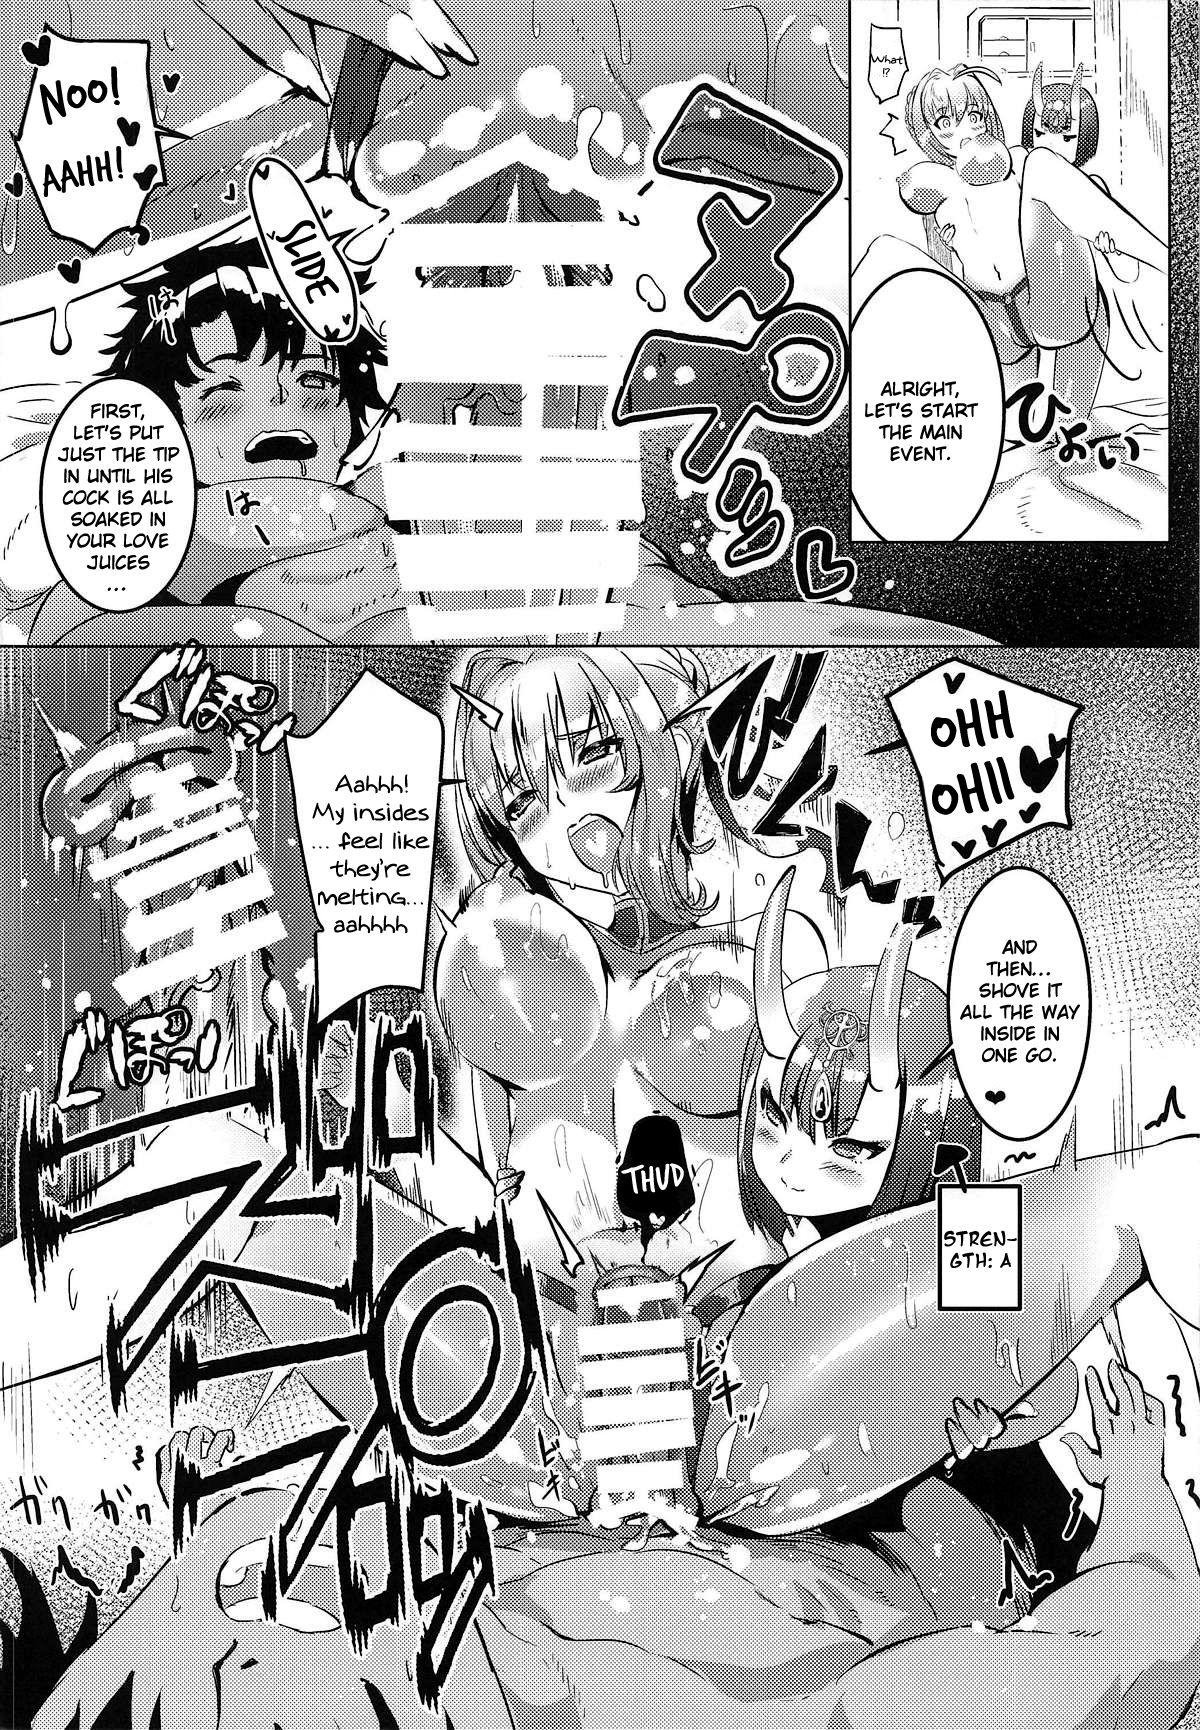 Grosso Koutei to Oni no Erohon | An Ero Book About an Emperor and an Oni - Fate grand order Amatures Gone Wild - Page 11